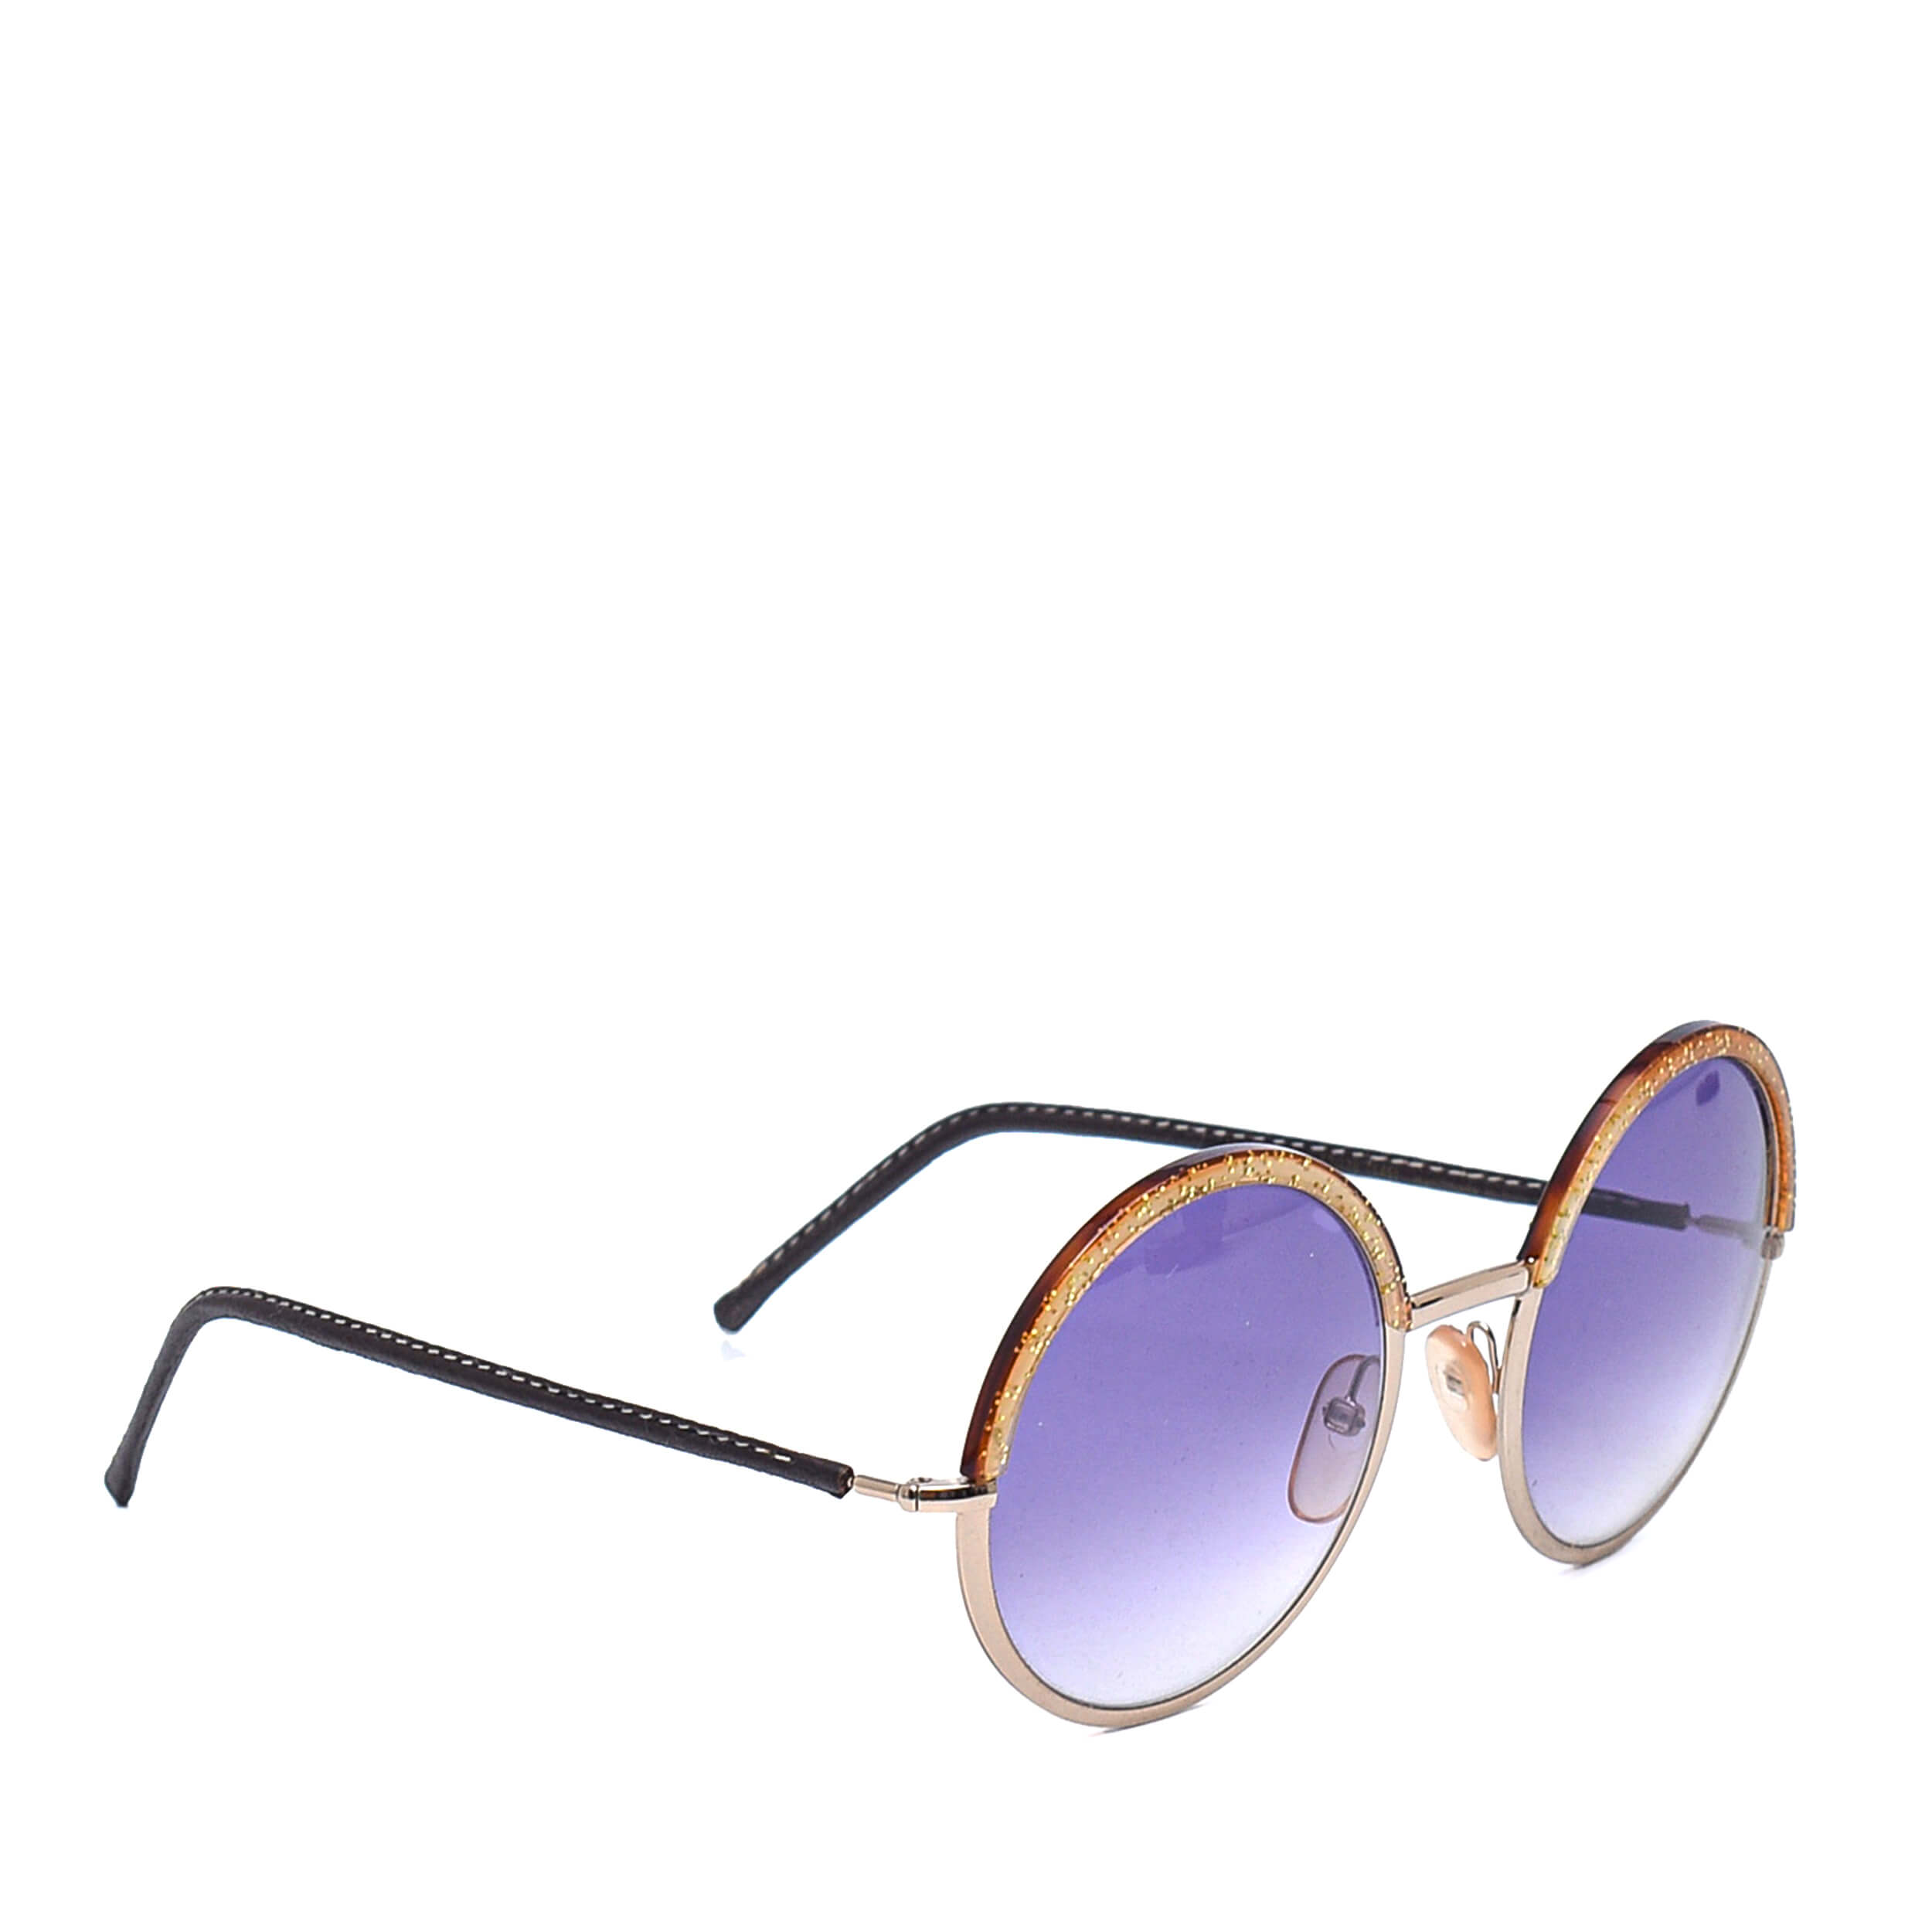 Cutler And Gross - Light Gold Tone Shiny Round Sunglasses